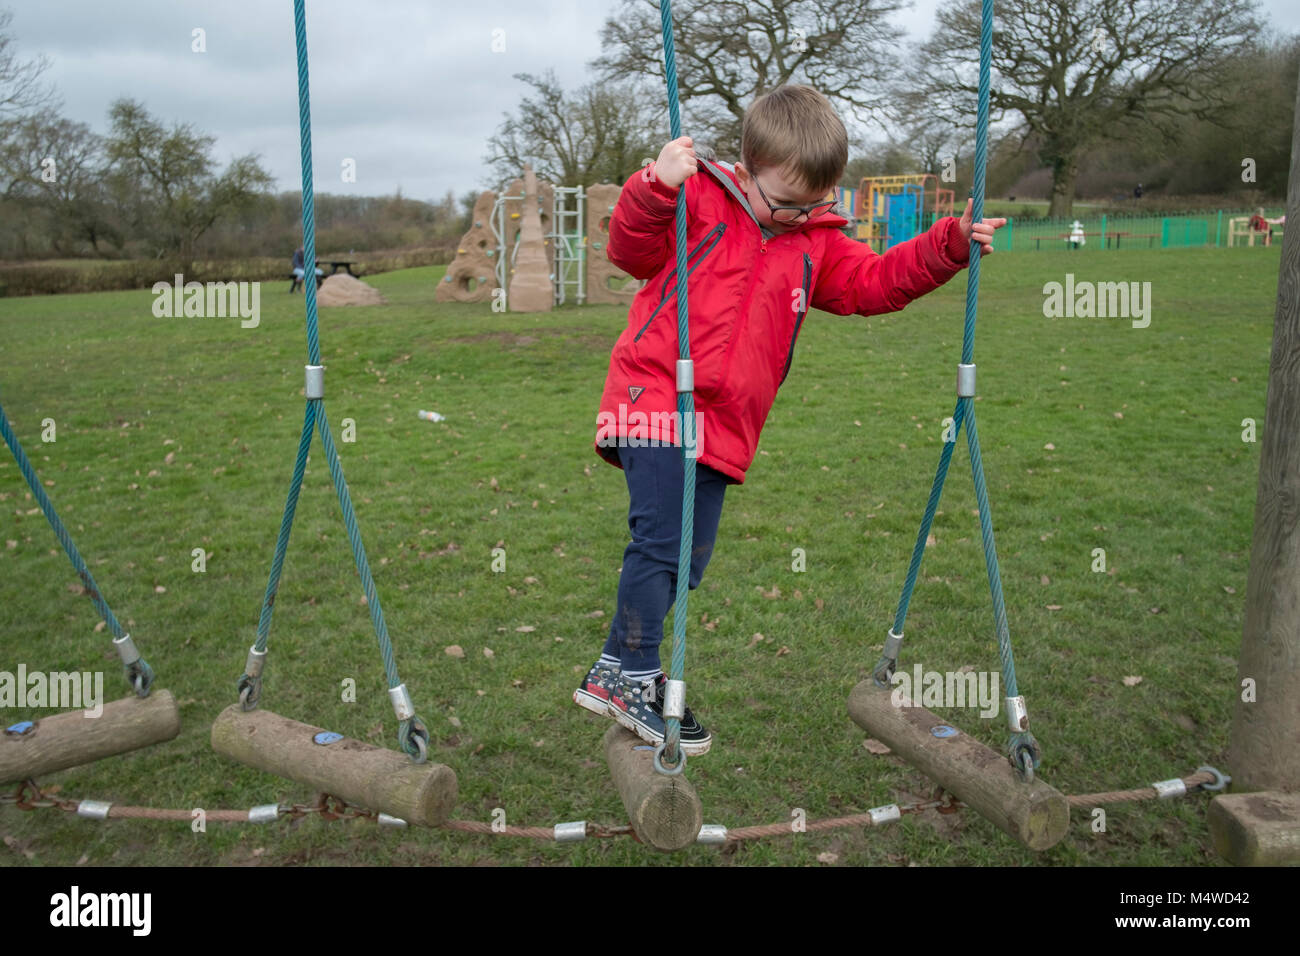 A young boy playing on a climbing frame in an outdoor park. Stock Photo